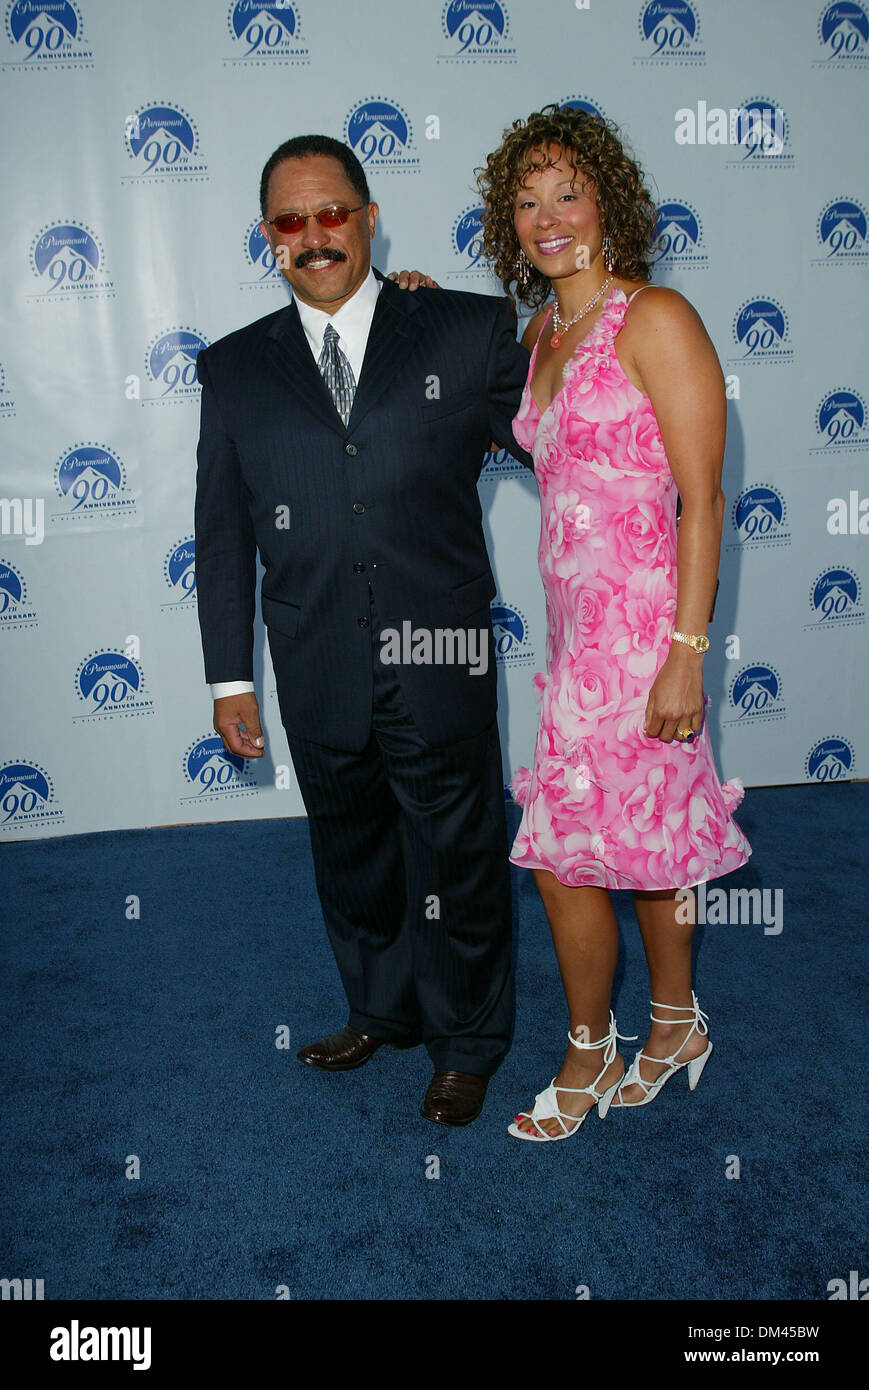 July 14, 2002 - Hollywood, CALIFORNIA - PARAMOIUNT PICTURES CELEBRATES 90TH ANNIVERSARY.WITH 90 STARS FOR 90 YEARS.AT PARAMOUNT PICTURES STUDIOS HOLLYWOOD, CA.JUDGE JOE BROWN AND WIFE. FITZROY BARRETT /    7-14-2002              K25523FB         (D)(Credit Image: © Globe Photos/ZUMAPRESS.com) Stock Photo